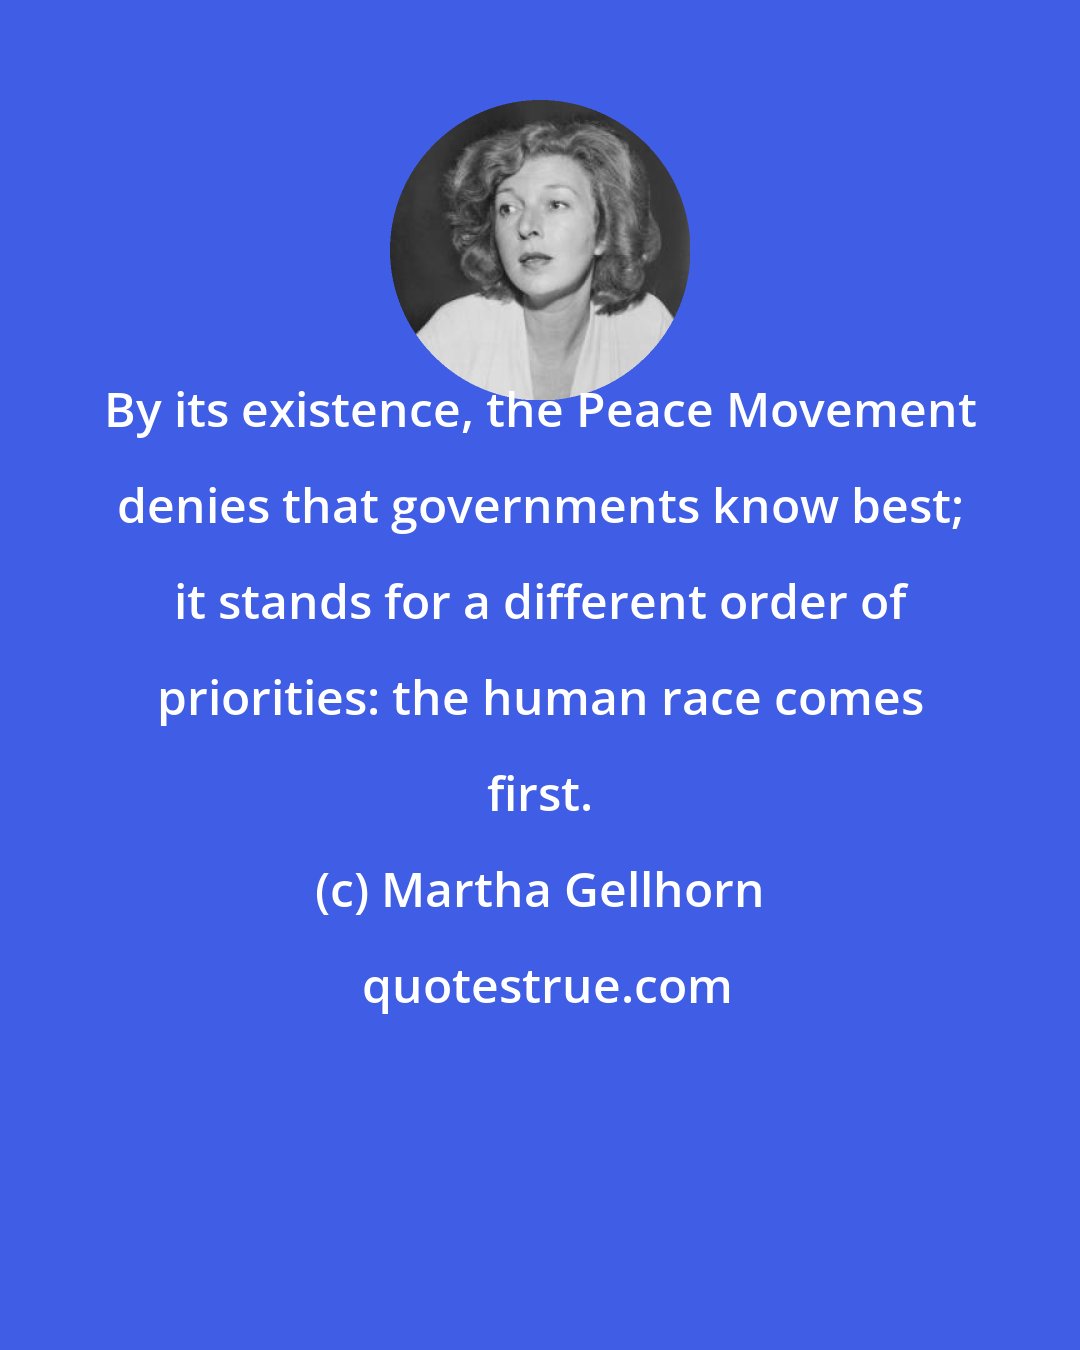 Martha Gellhorn: By its existence, the Peace Movement denies that governments know best; it stands for a different order of priorities: the human race comes first.